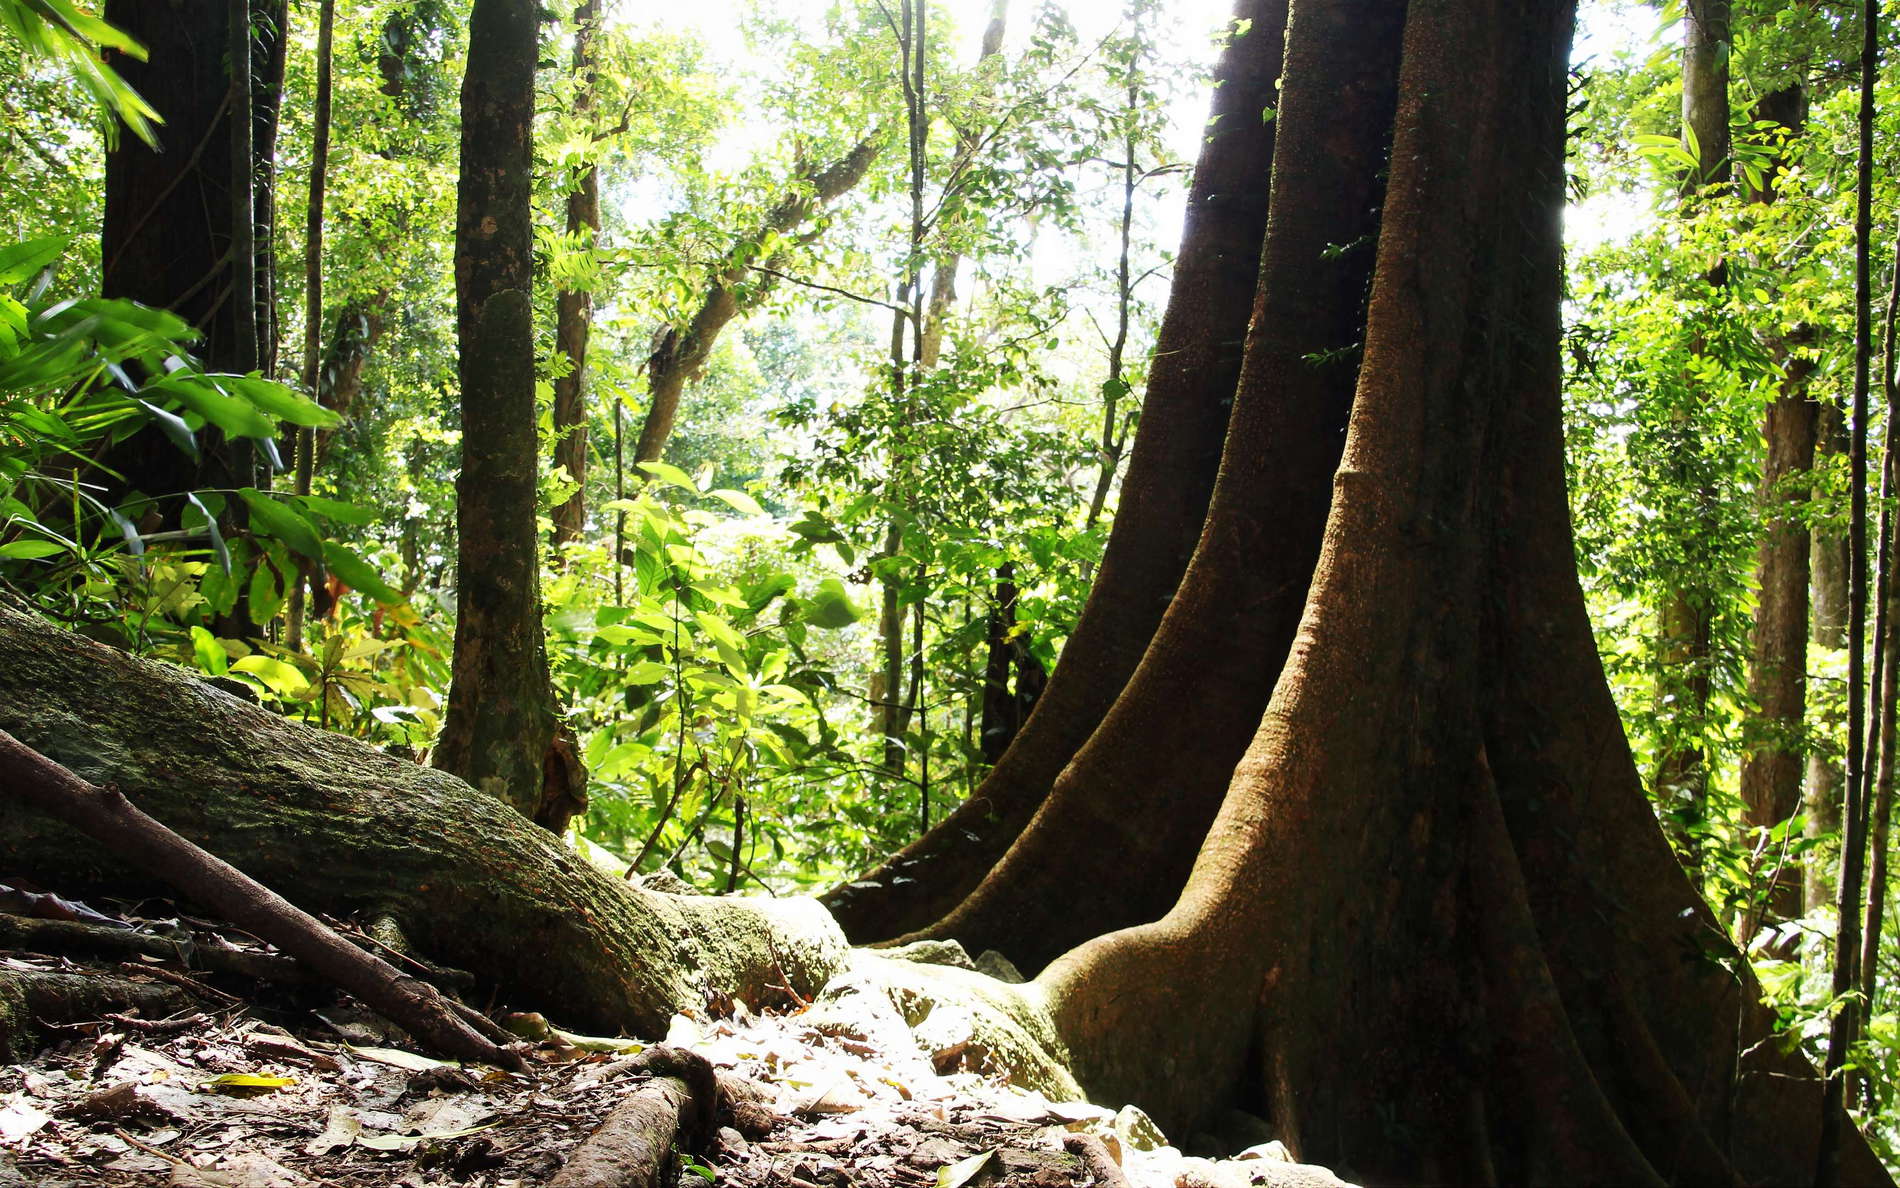 Mt. Sorrow  |  Tropical rainforest with buttresses